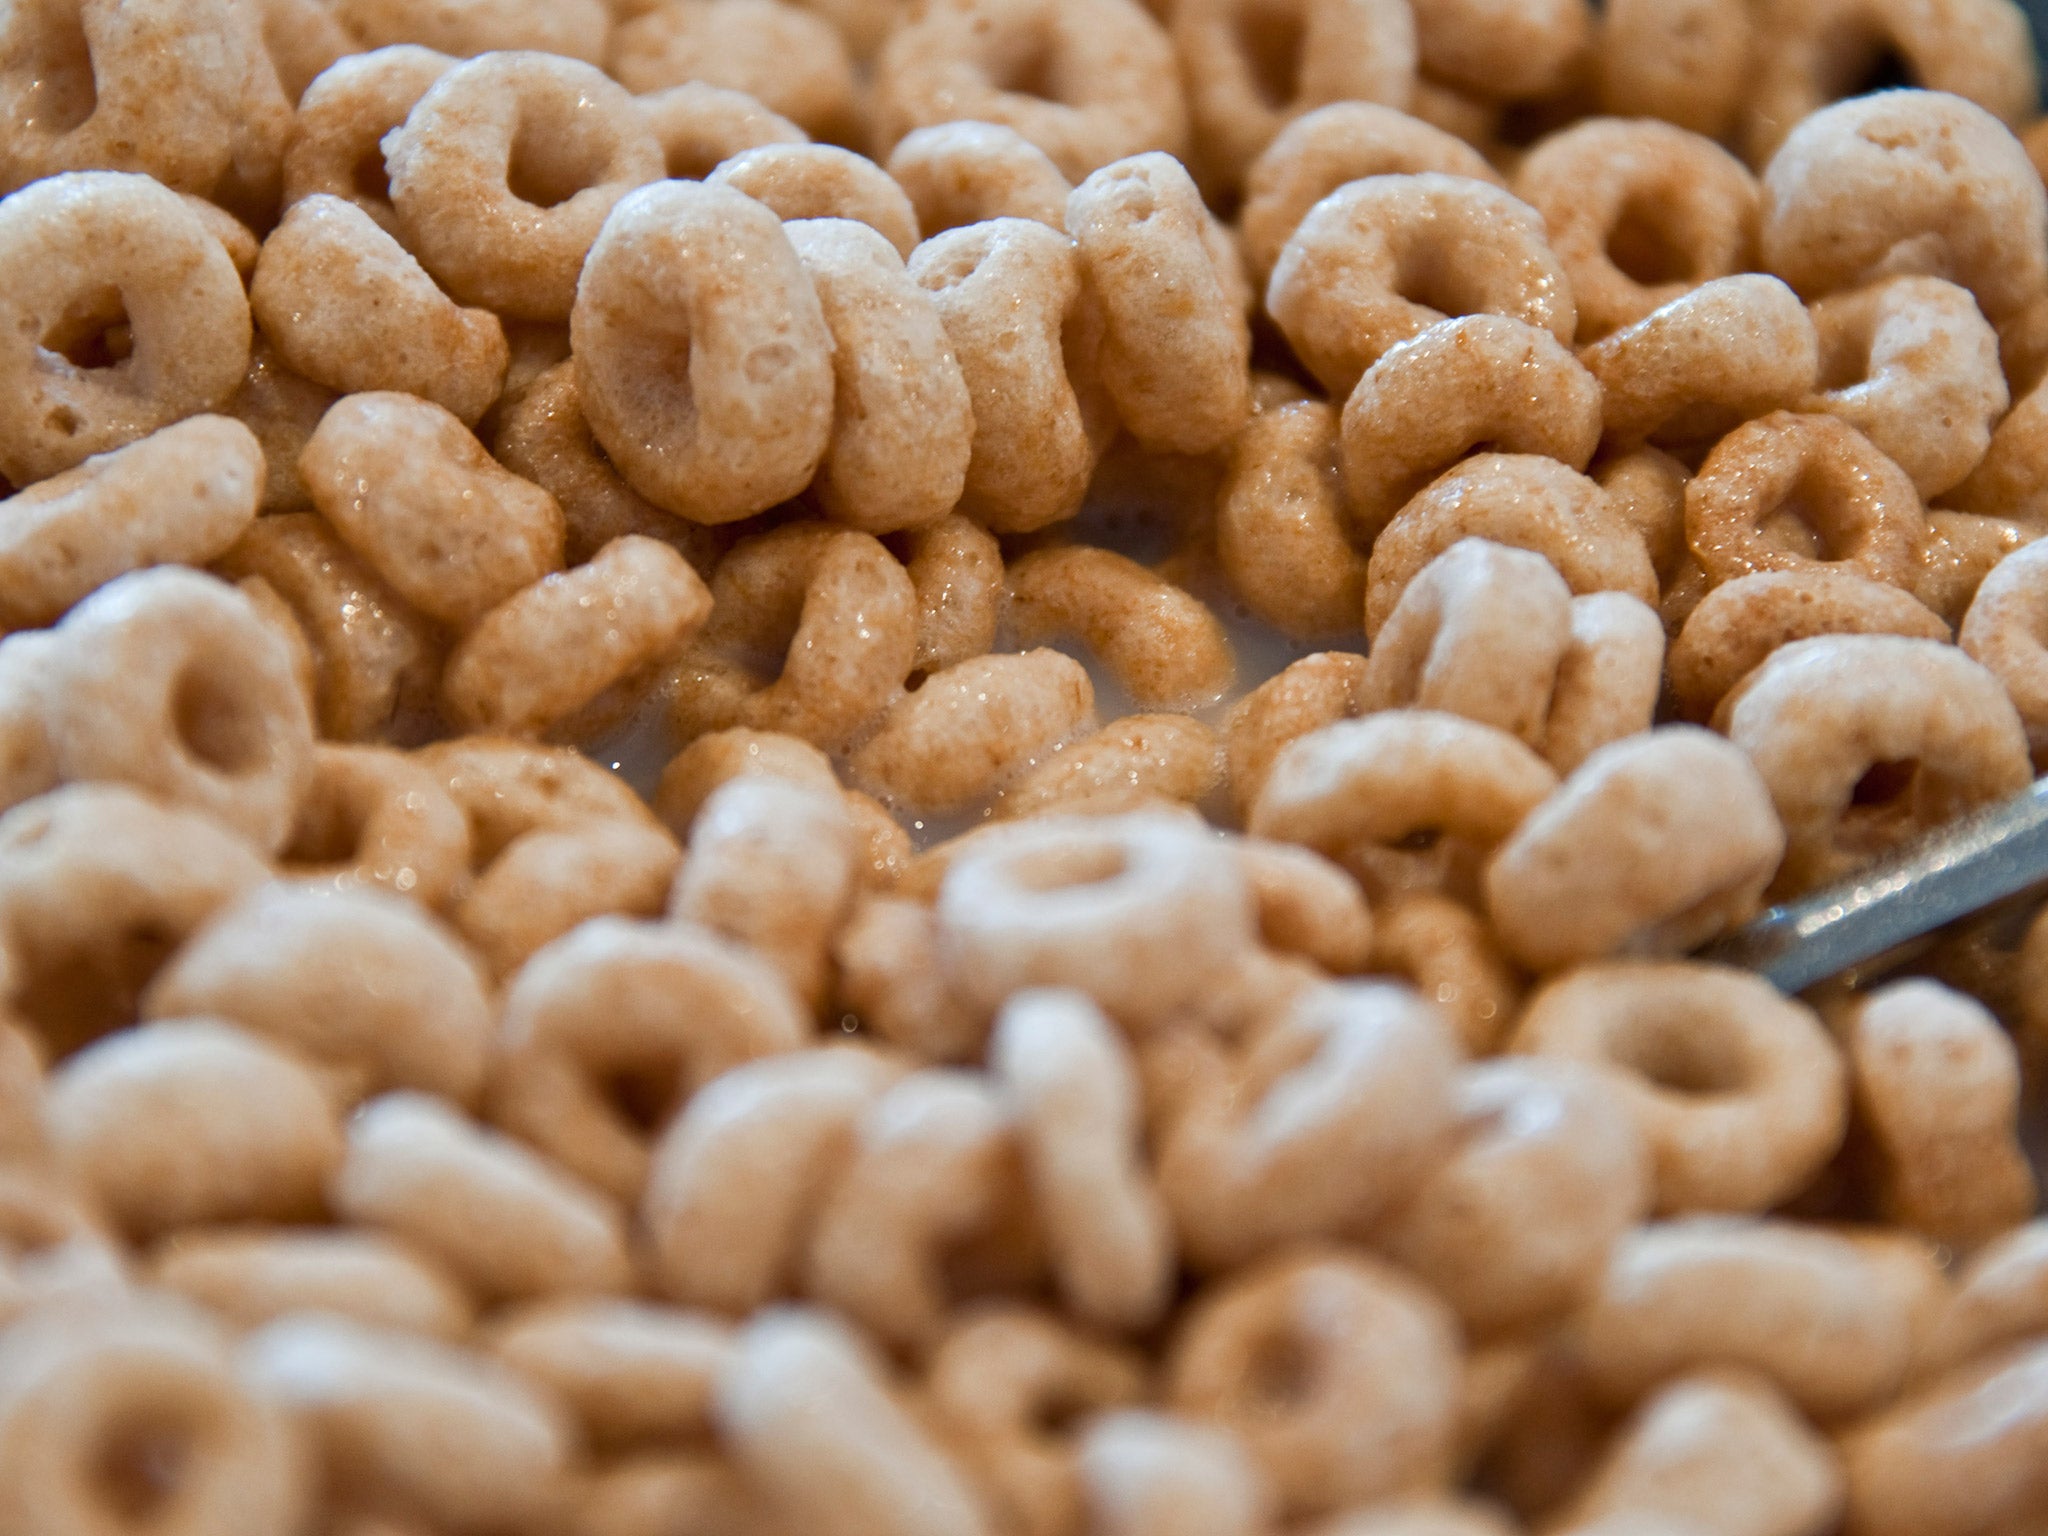 The experiments involved ants moving pieces of Cheerios breakfast cereal